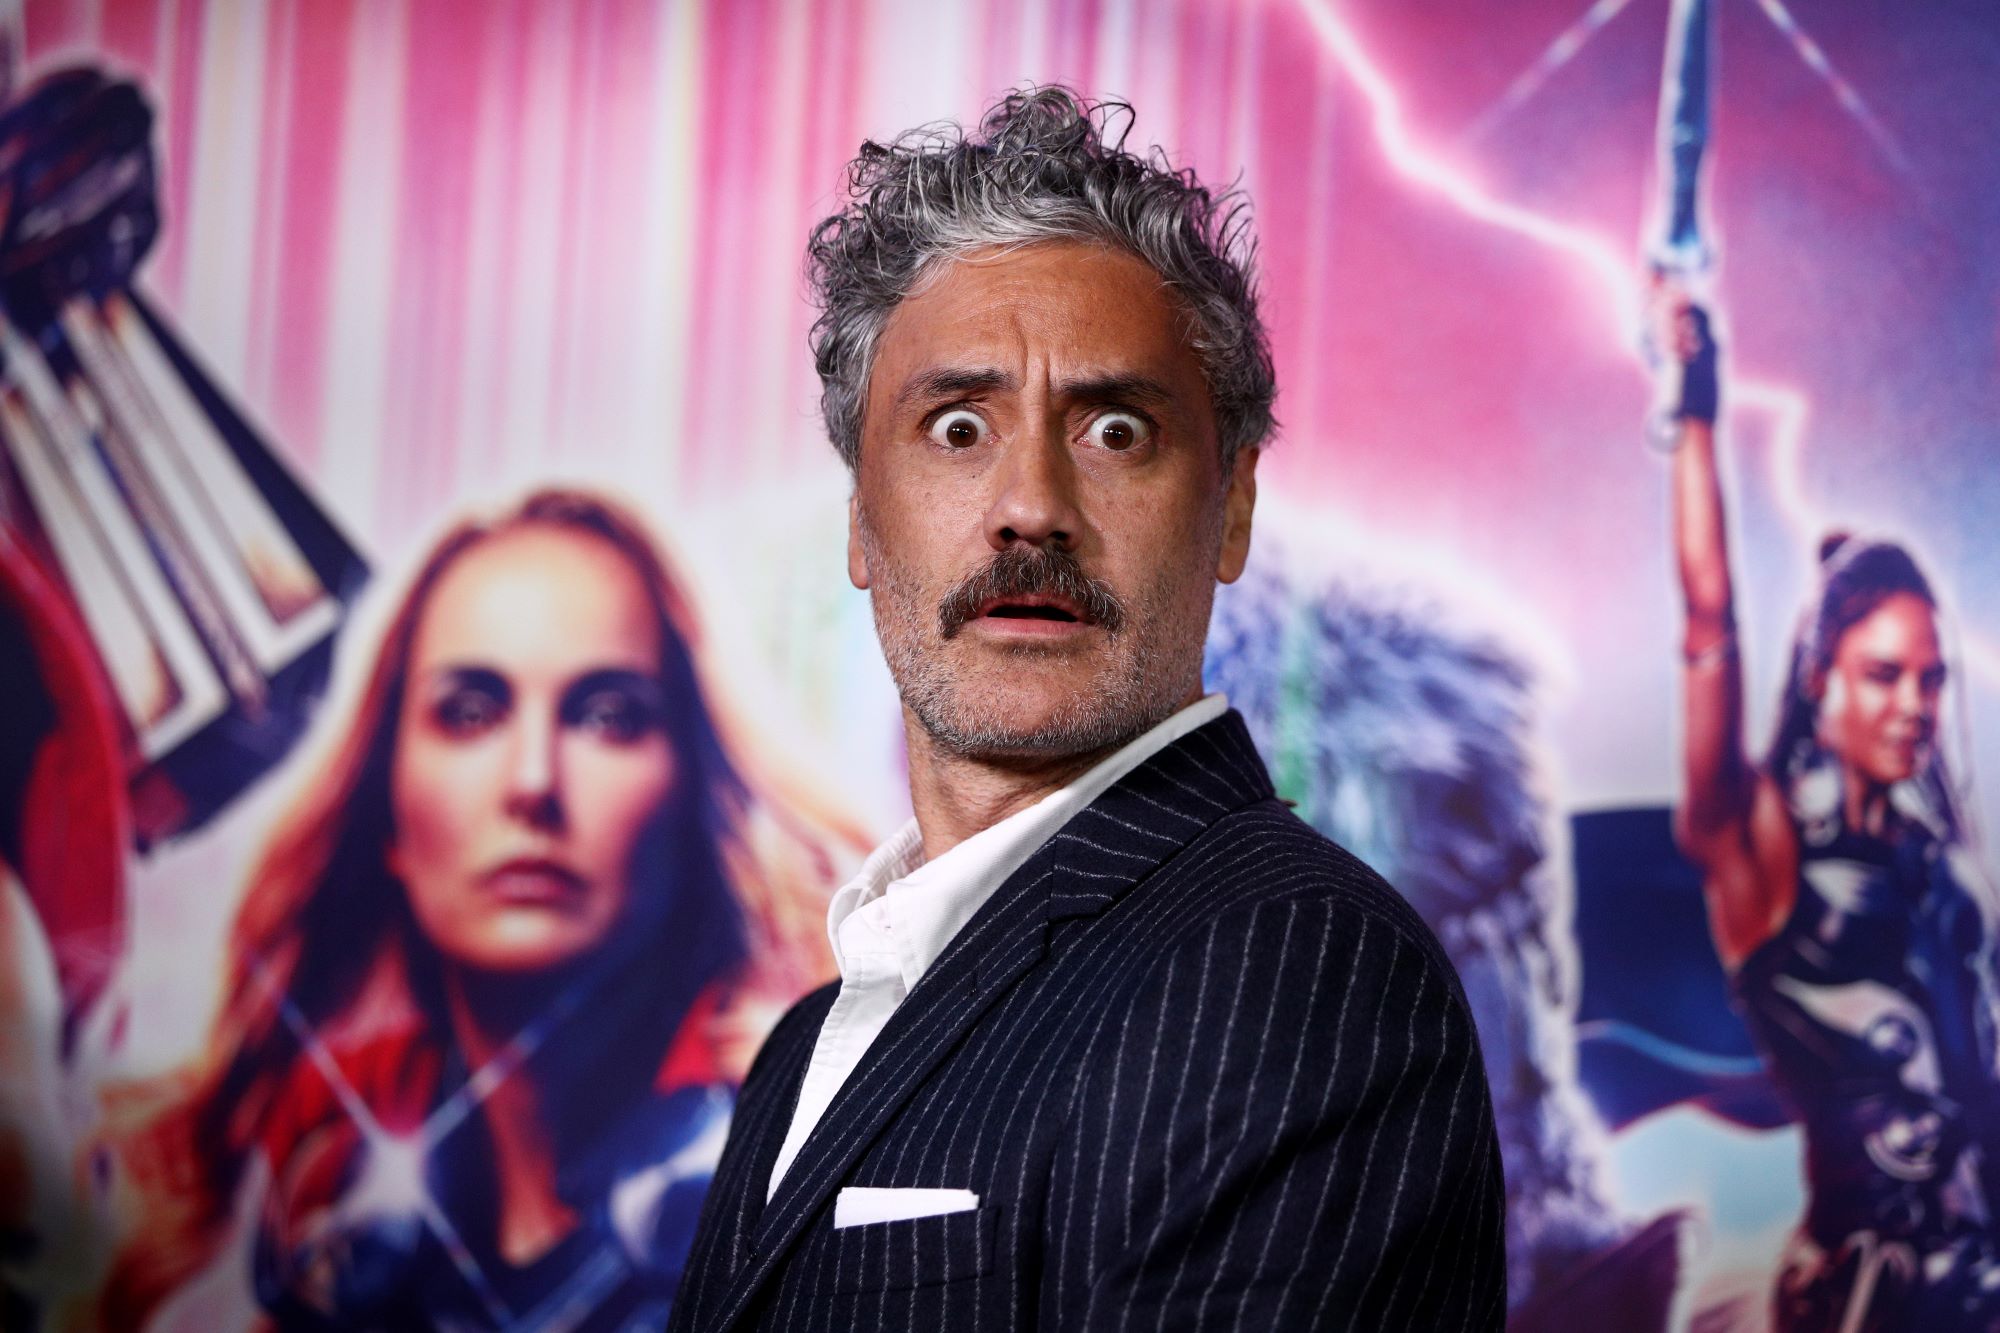 Thor: Love and Thunder' Review: Taika Waititi's Marvel Return Is a